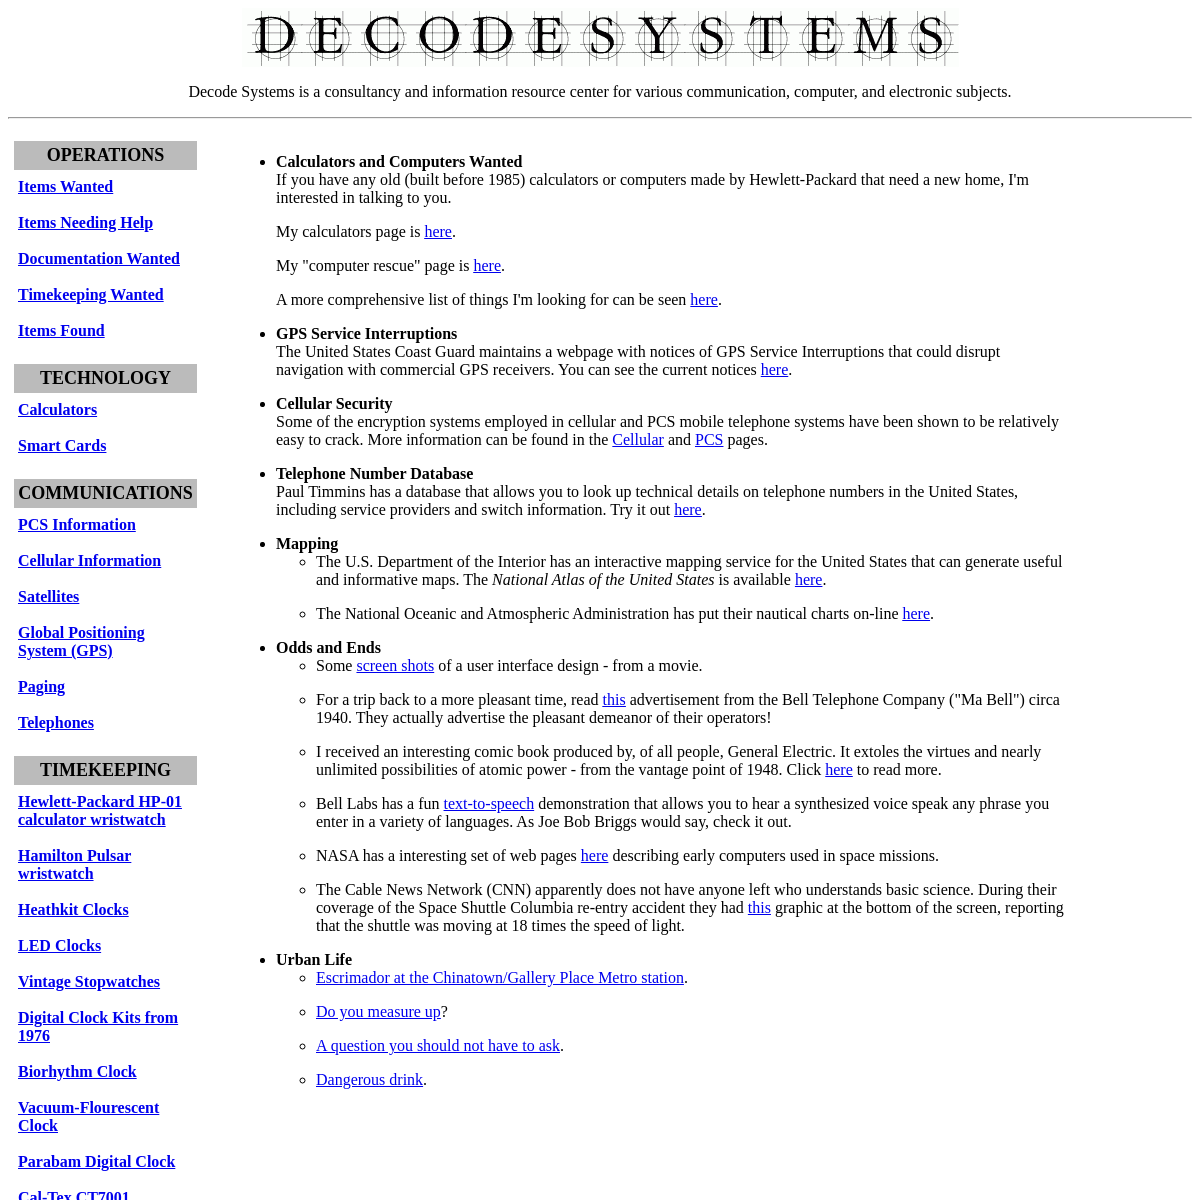 A complete backup of decodesystems.com